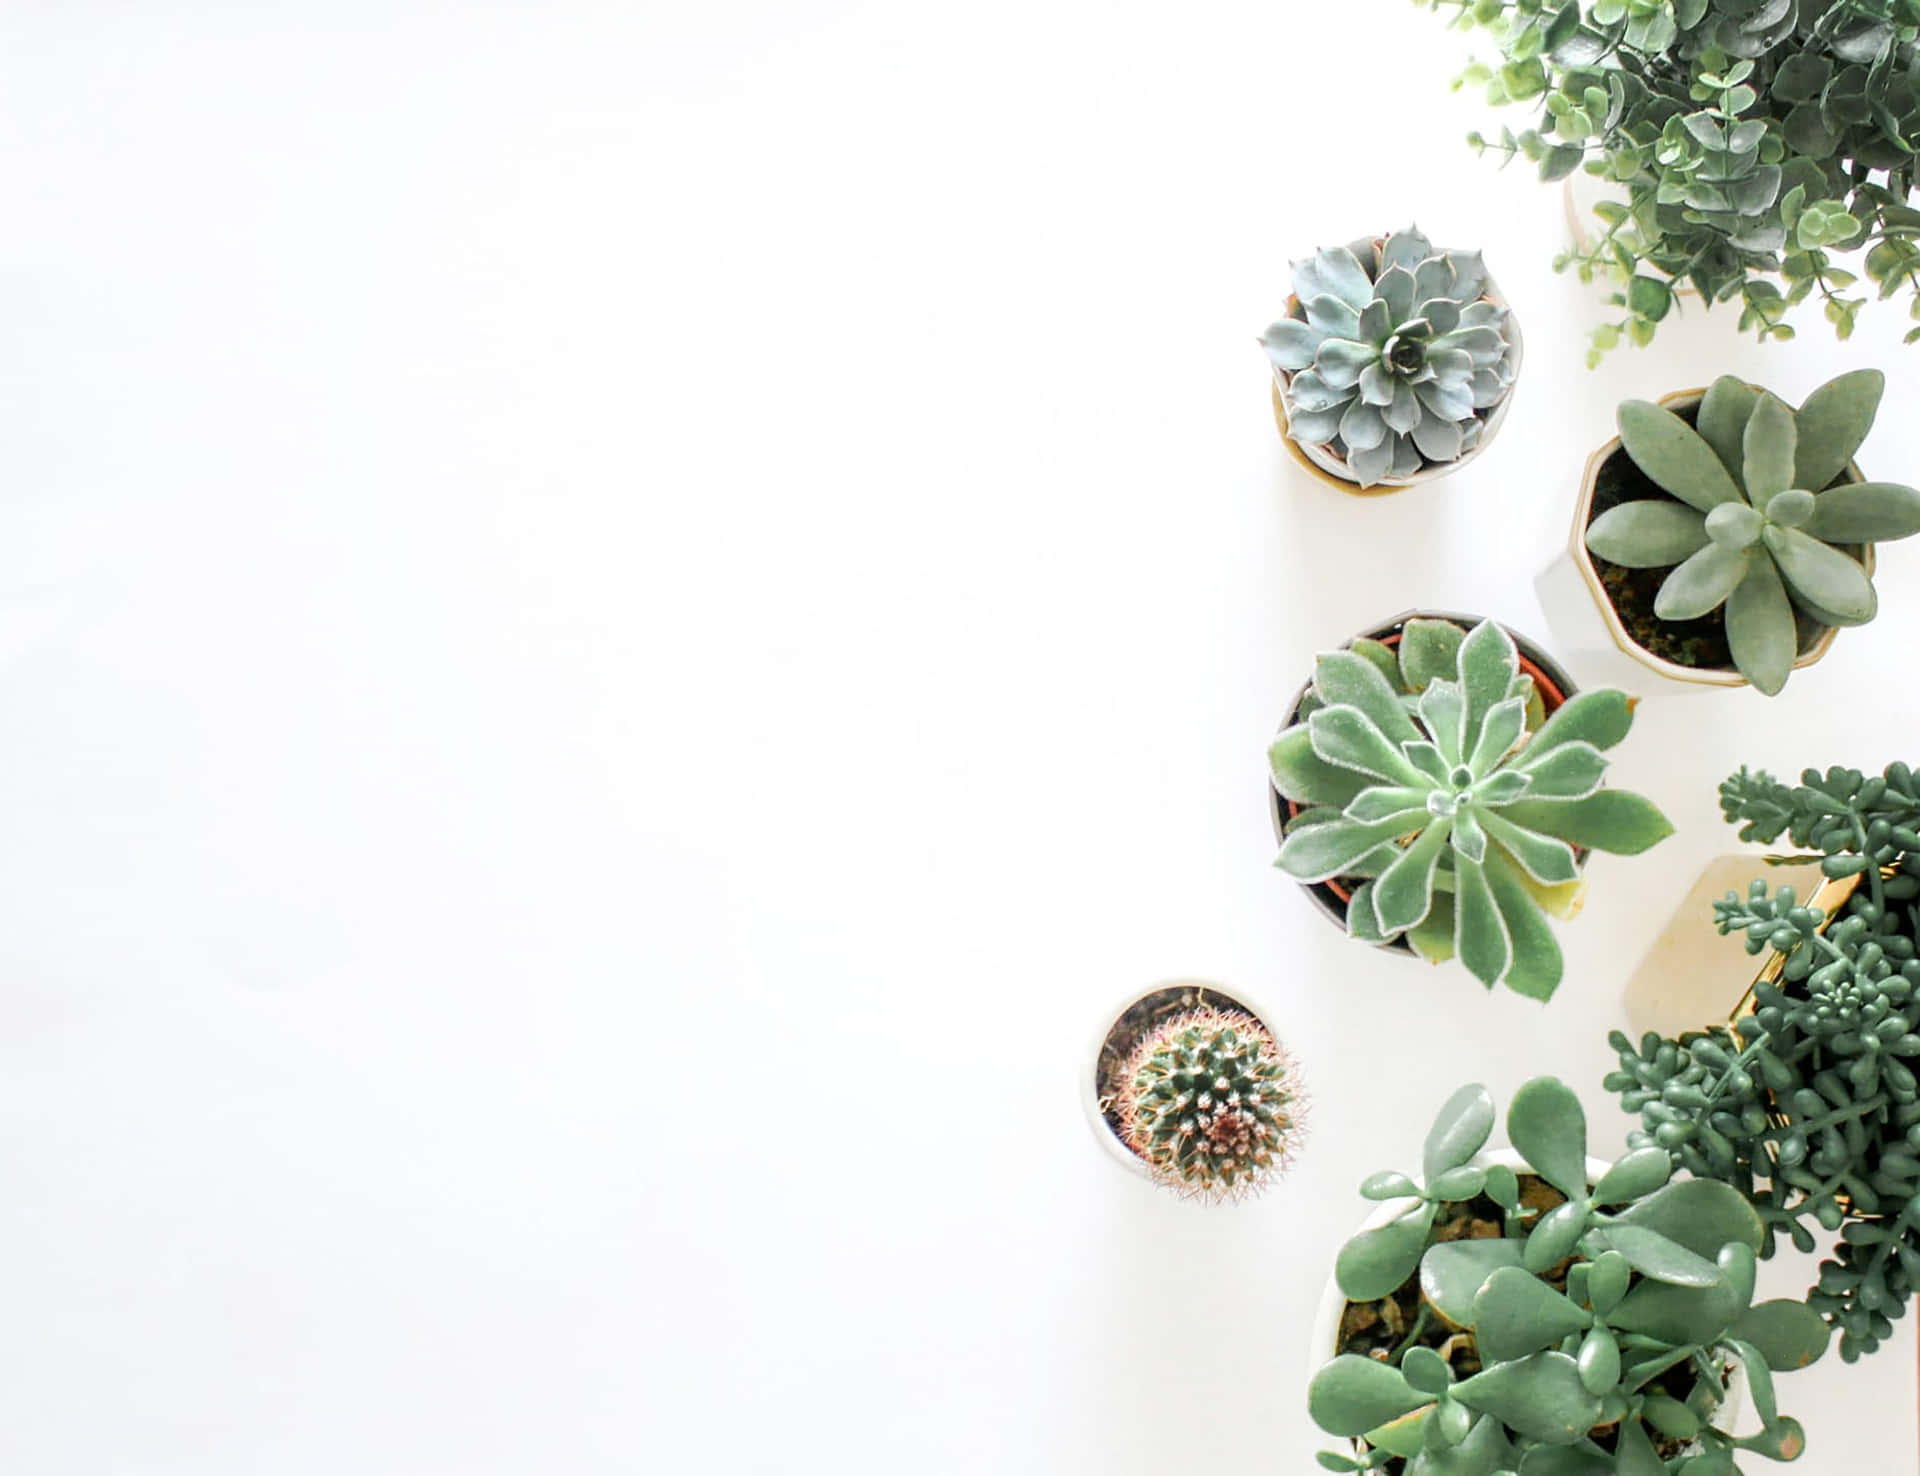 A Group Of Succulents On A White Background